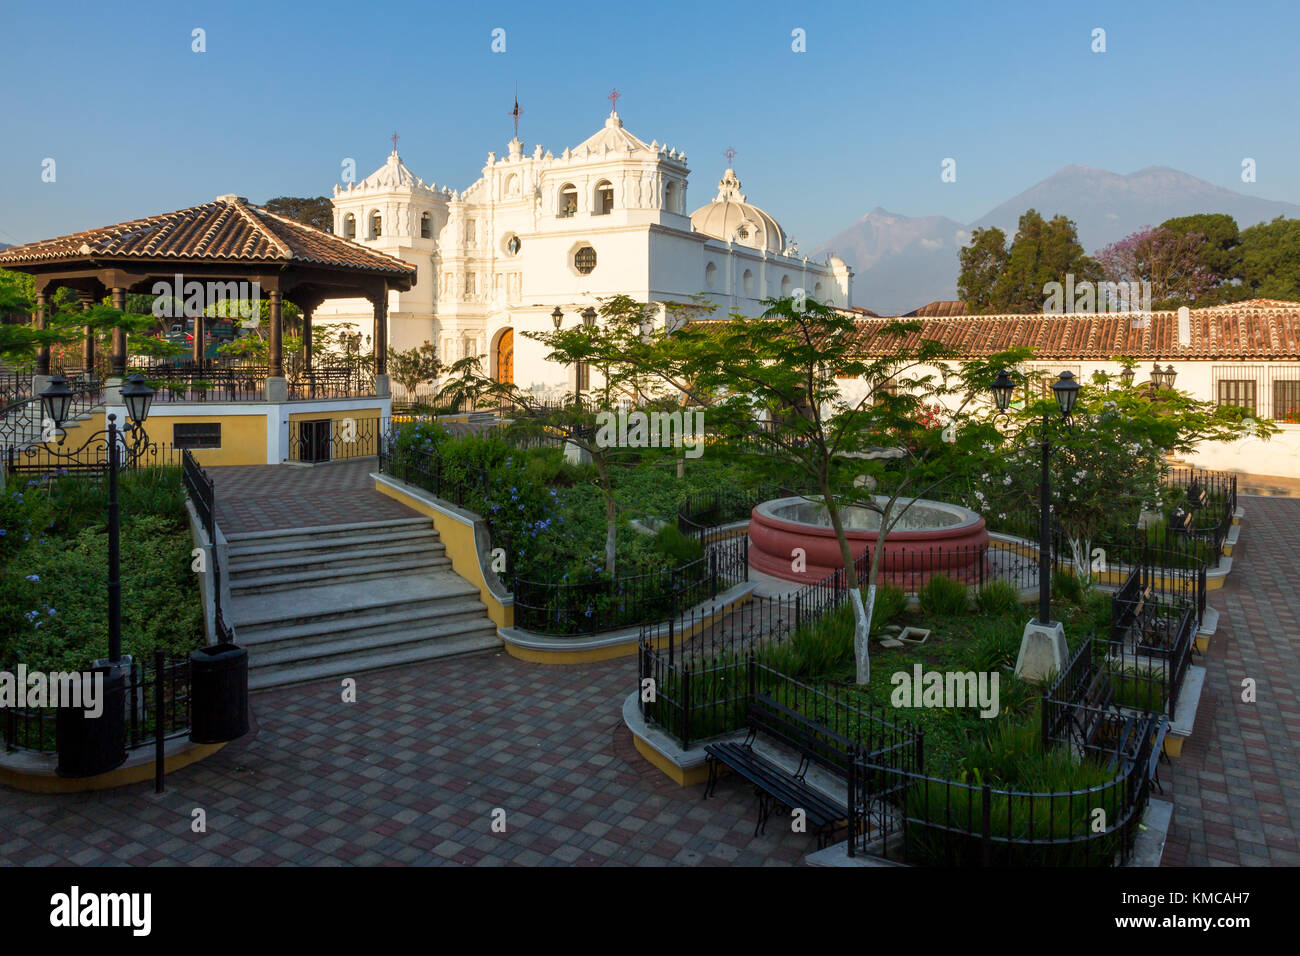 Main square with view to the volcanoes Acatenango and Fuego in the background | Ciudad Vieja | Guatemala Stock Photo